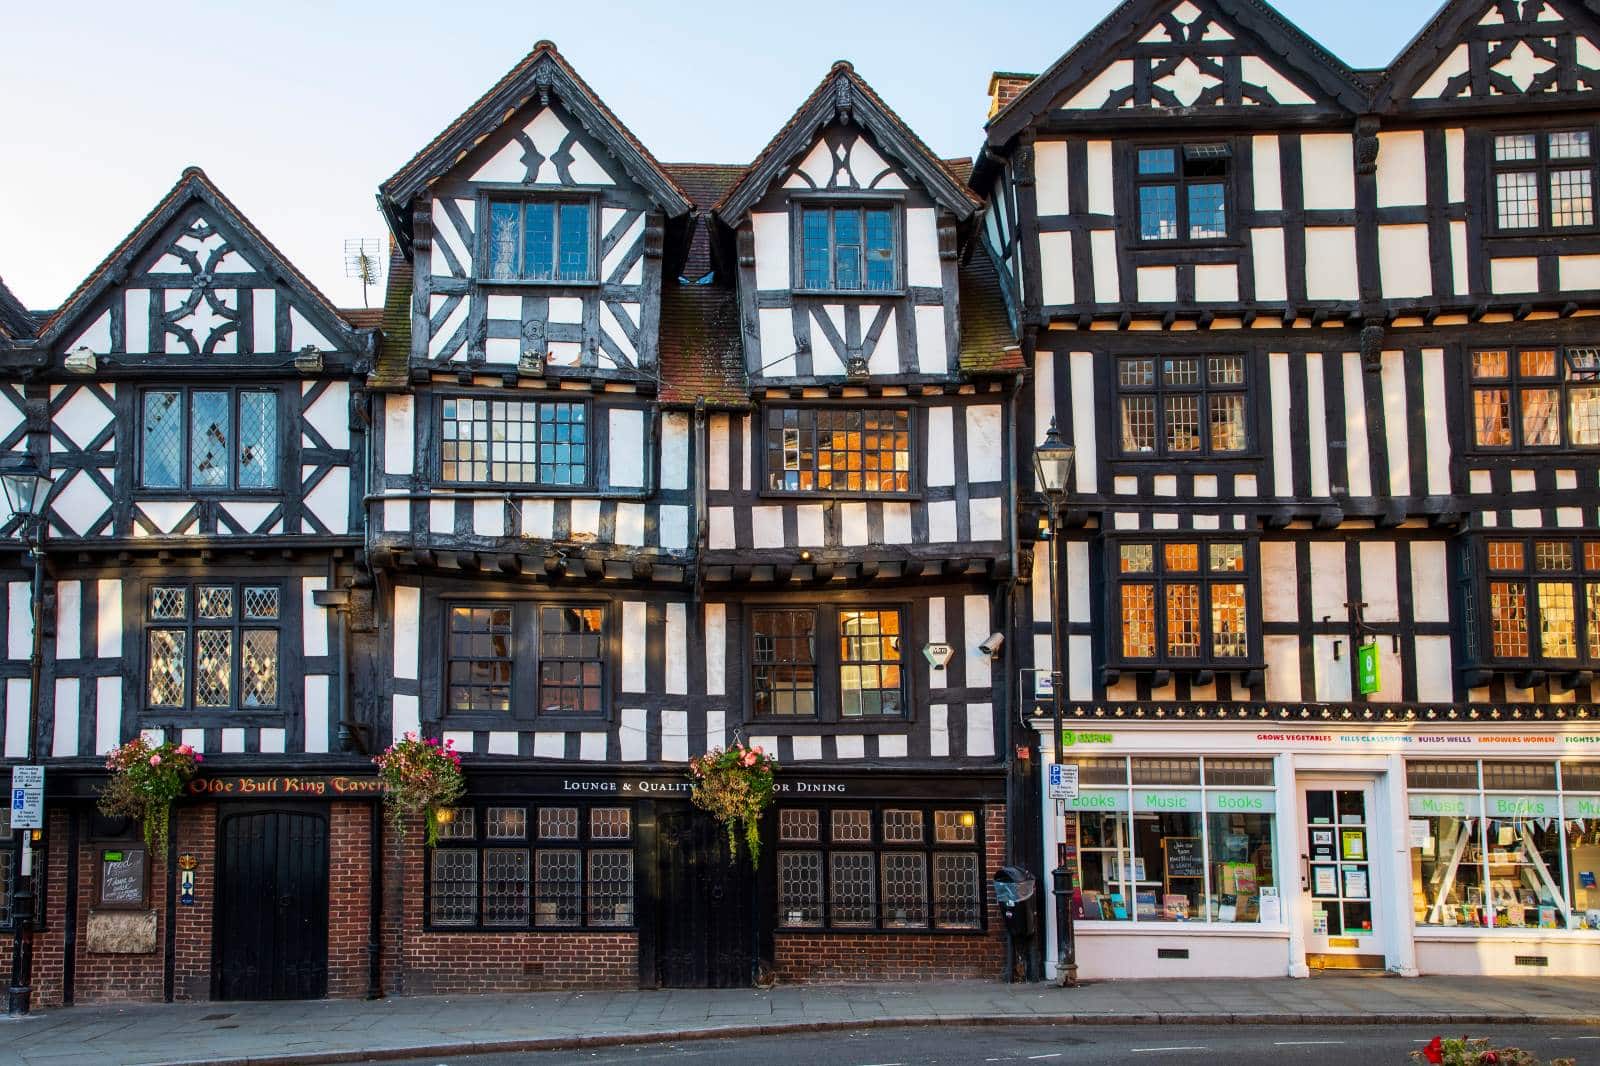 Image Credit: Shutterstock / Magdanatka <p><span>Ludlow, a foodie paradise nestled in the rolling hills of Shropshire, offers retirees a chance to indulge in the finer things in life without breaking the bank. With its abundance of gourmet restaurants and food festivals, you can spend your days sampling delicious delicacies from around the world. And if you’re feeling particularly adventurous, you can always sign up for a cooking class and learn how to whip up a culinary masterpiece of your own.</span></p>